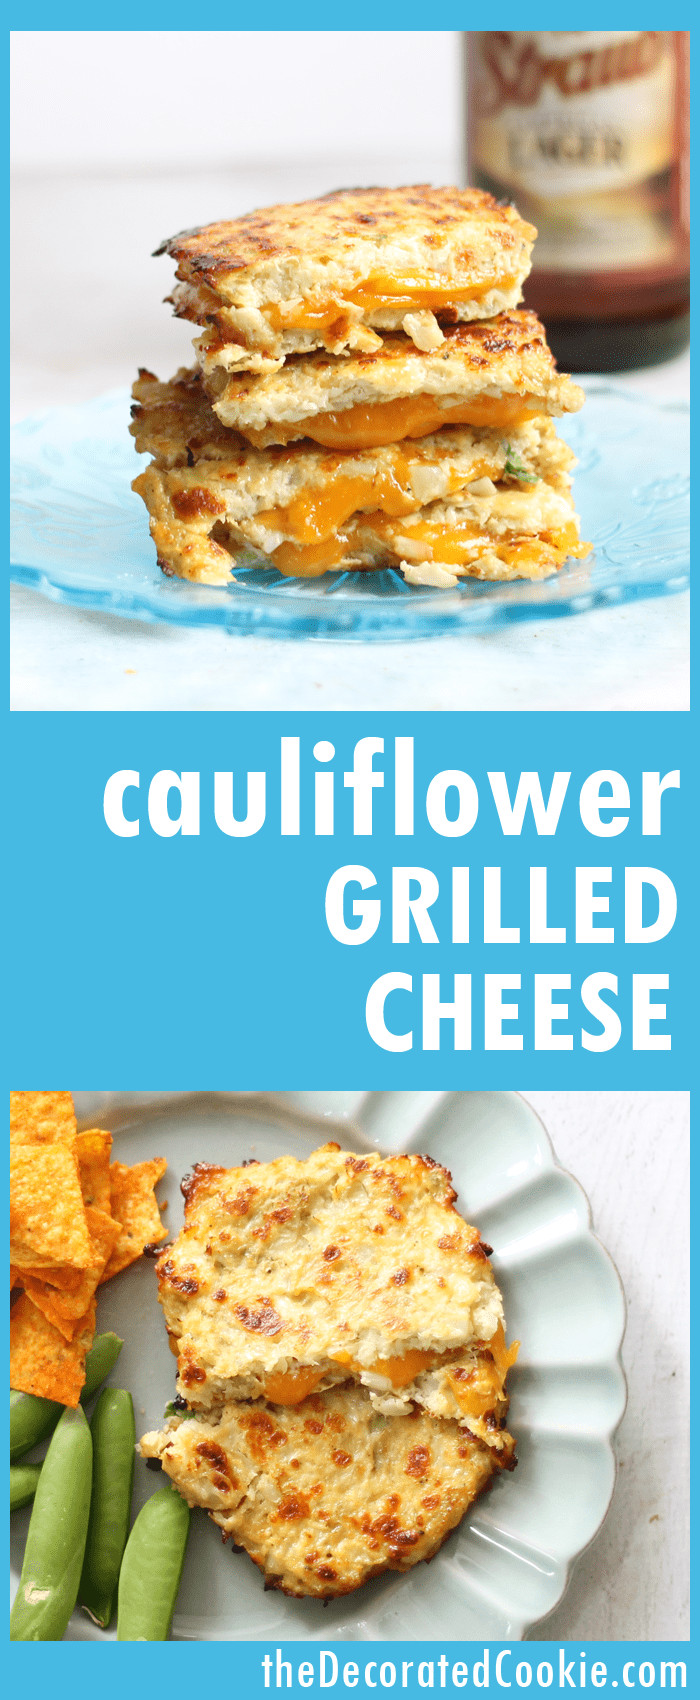 Healthy Substitute For Bread
 grilled cheese with cauliflower bread is a low carb keto